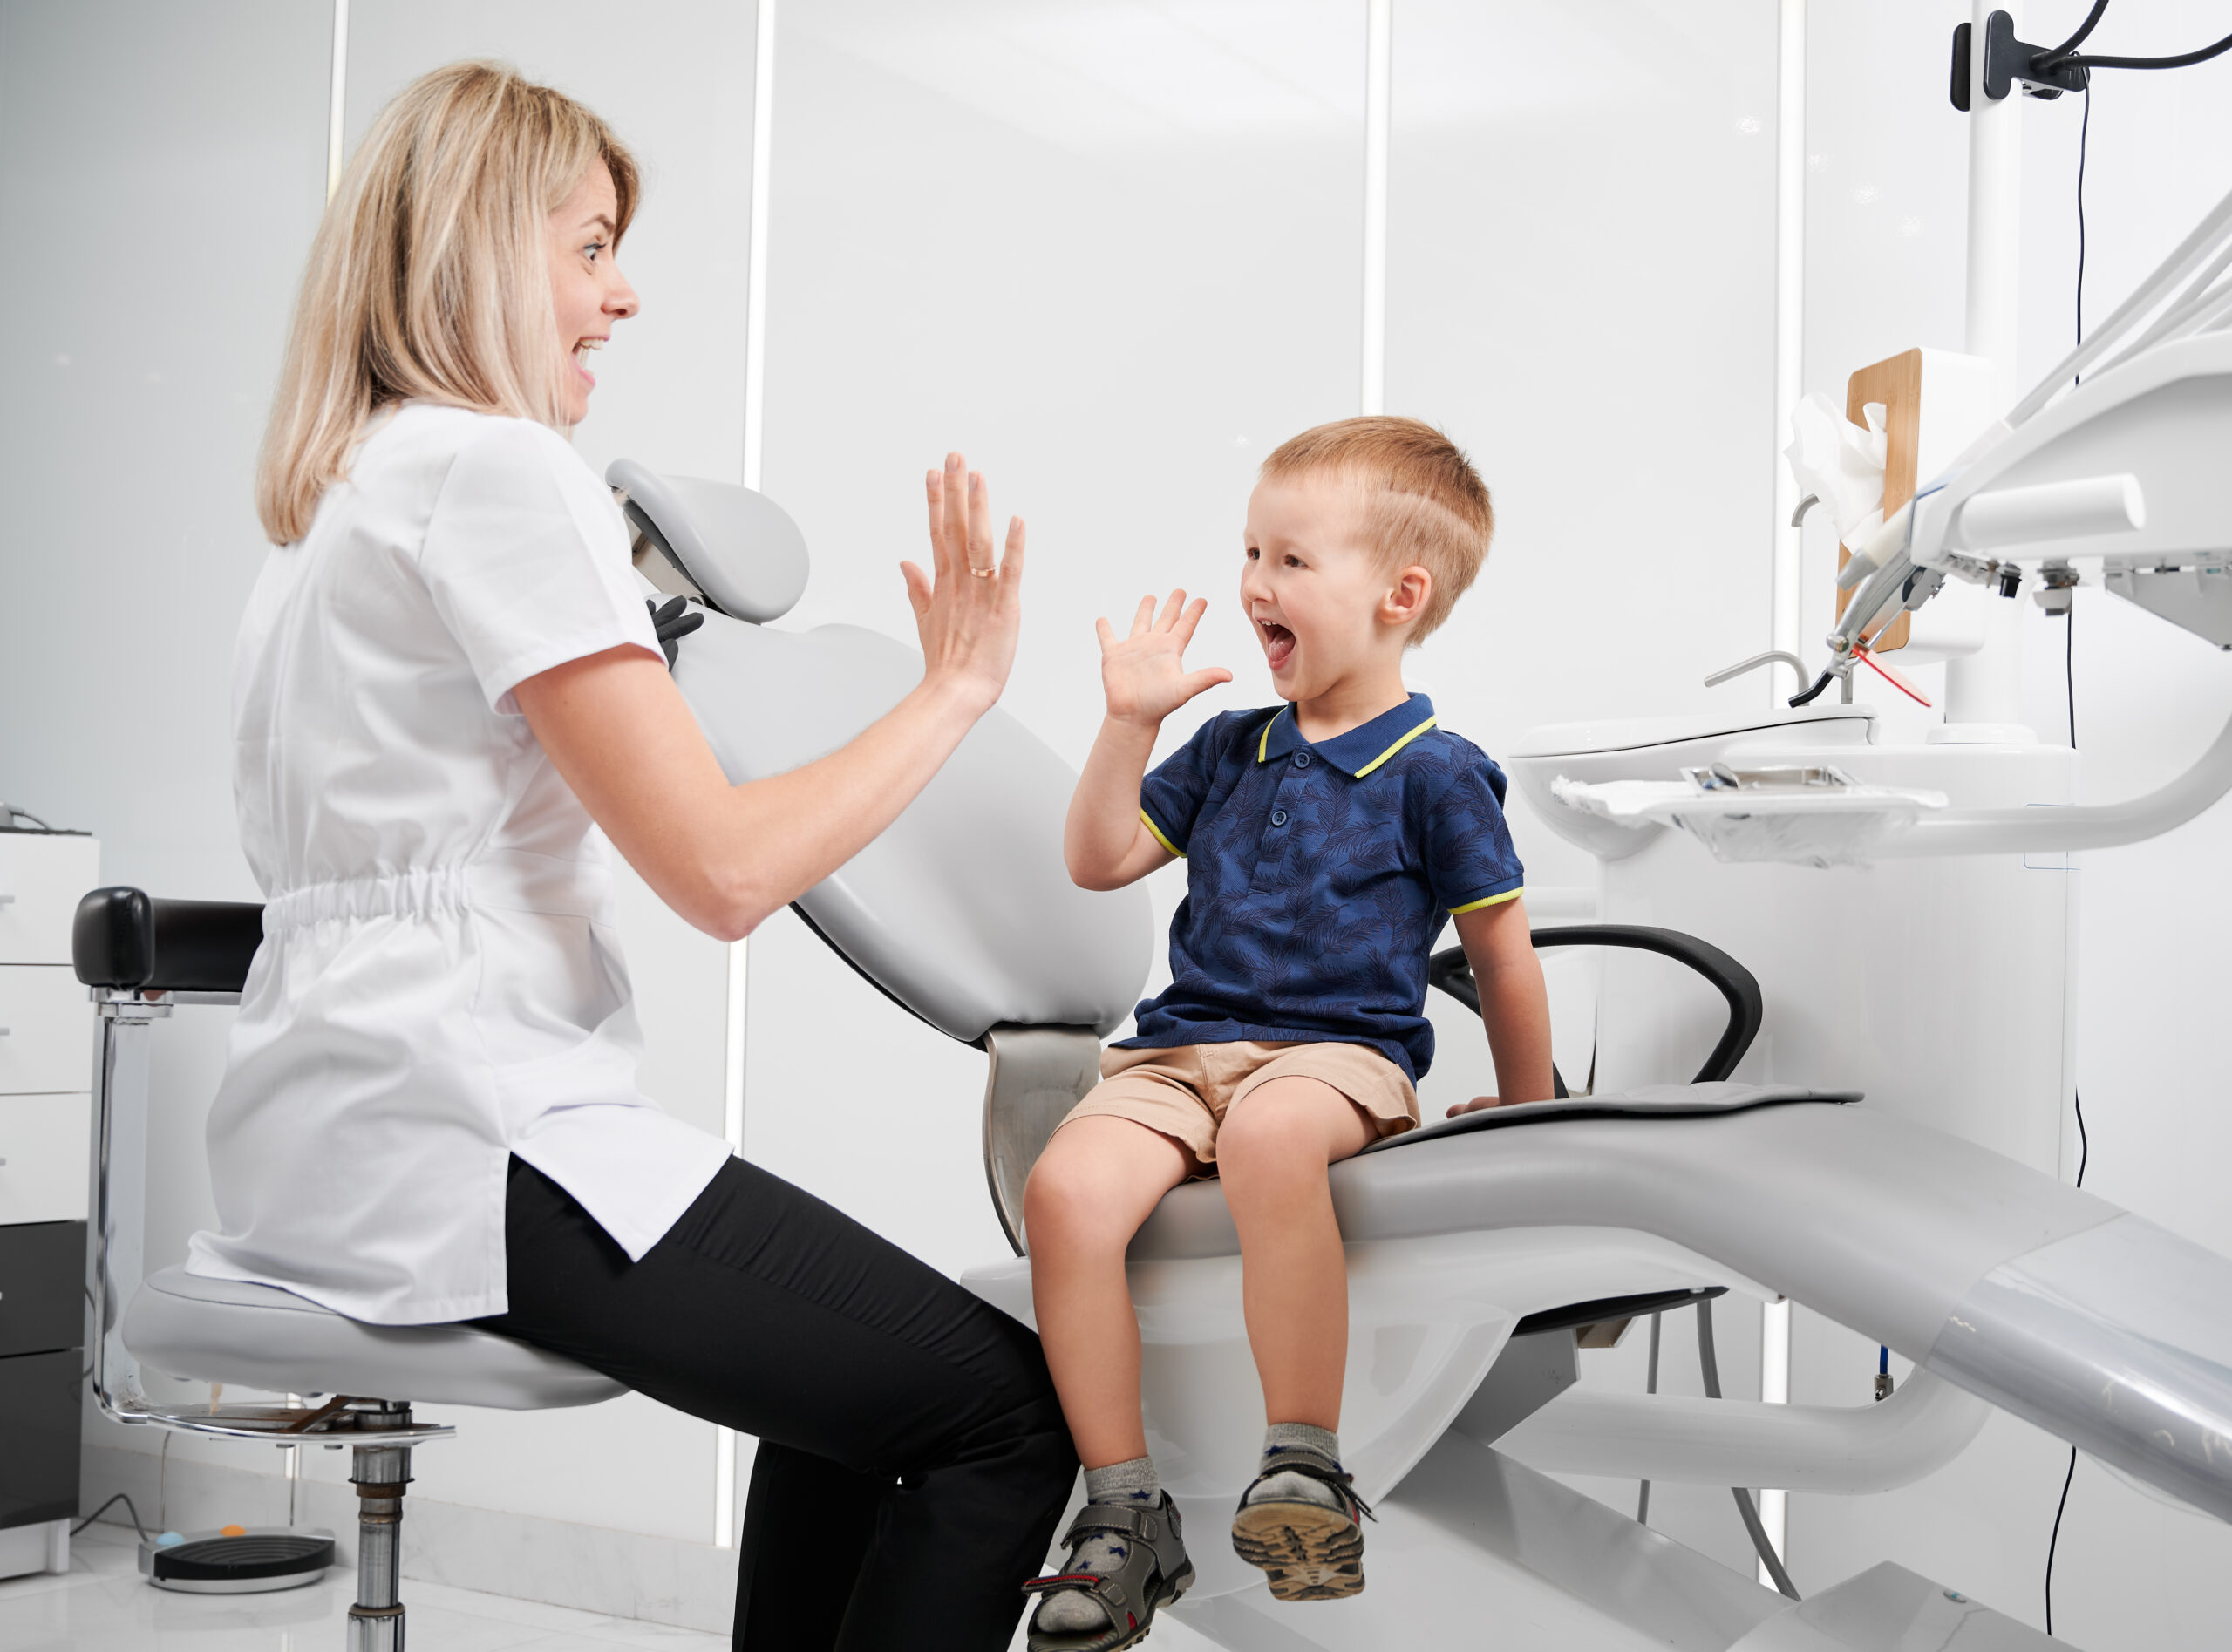 How to Prepare a Child with Autism for a Visit to the Dentist